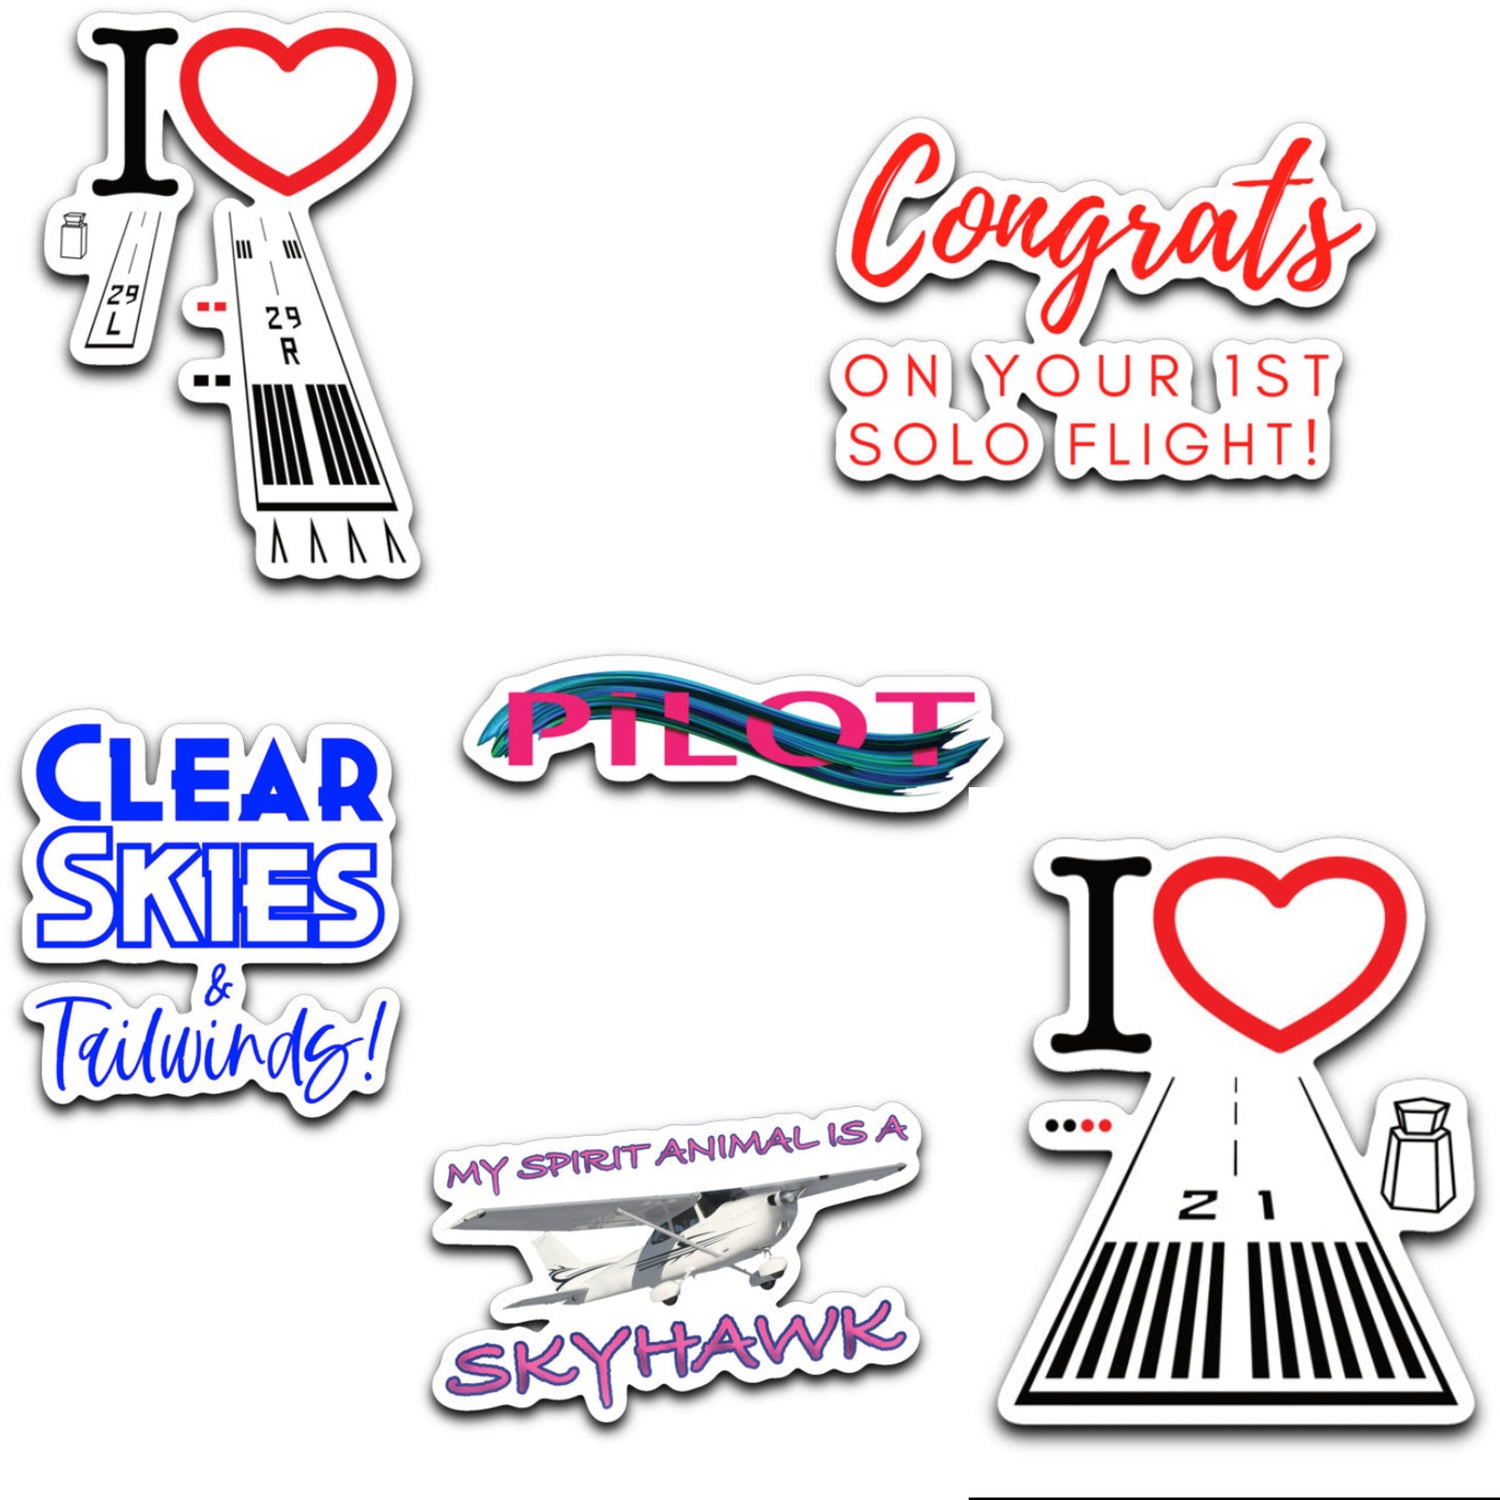 Aviation themed decals, approx. 3 5/8 x 2 5/8 inches